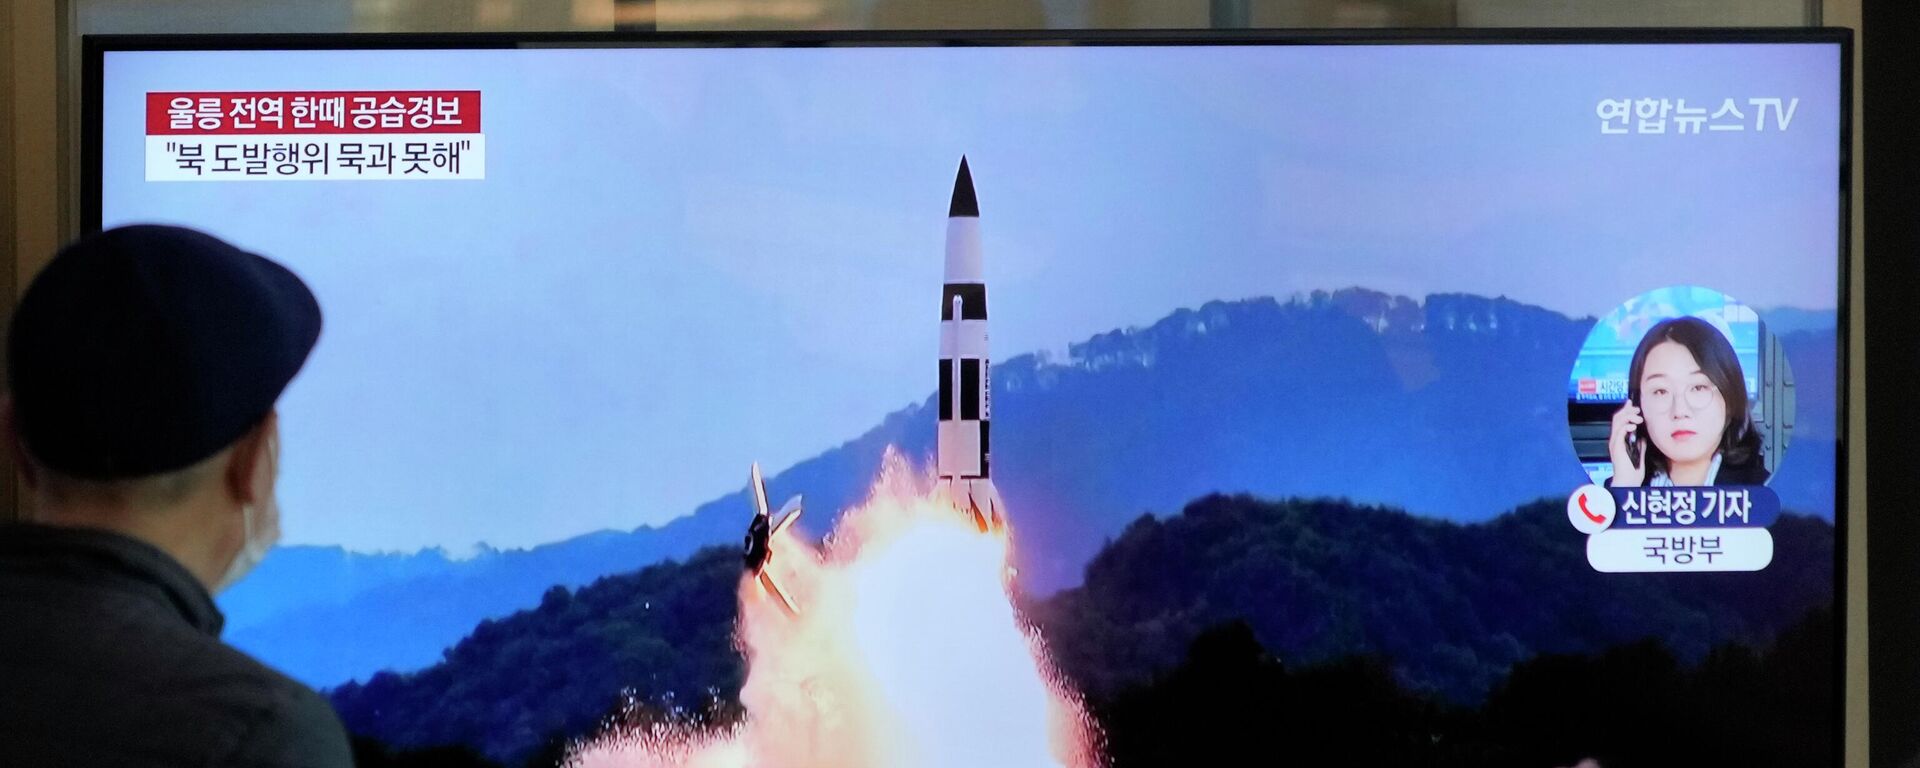 A TV screen shows a file image of North Korea's missile launch during a news program at the Seoul Railway Station in Seoul, South Korea, Wednesday, Nov. 2, 2022. South Korea says it has issued an air raid alert for residents on an island off its eastern coast after North Korea fired a few missiles toward the sea - Sputnik International, 1920, 07.11.2022